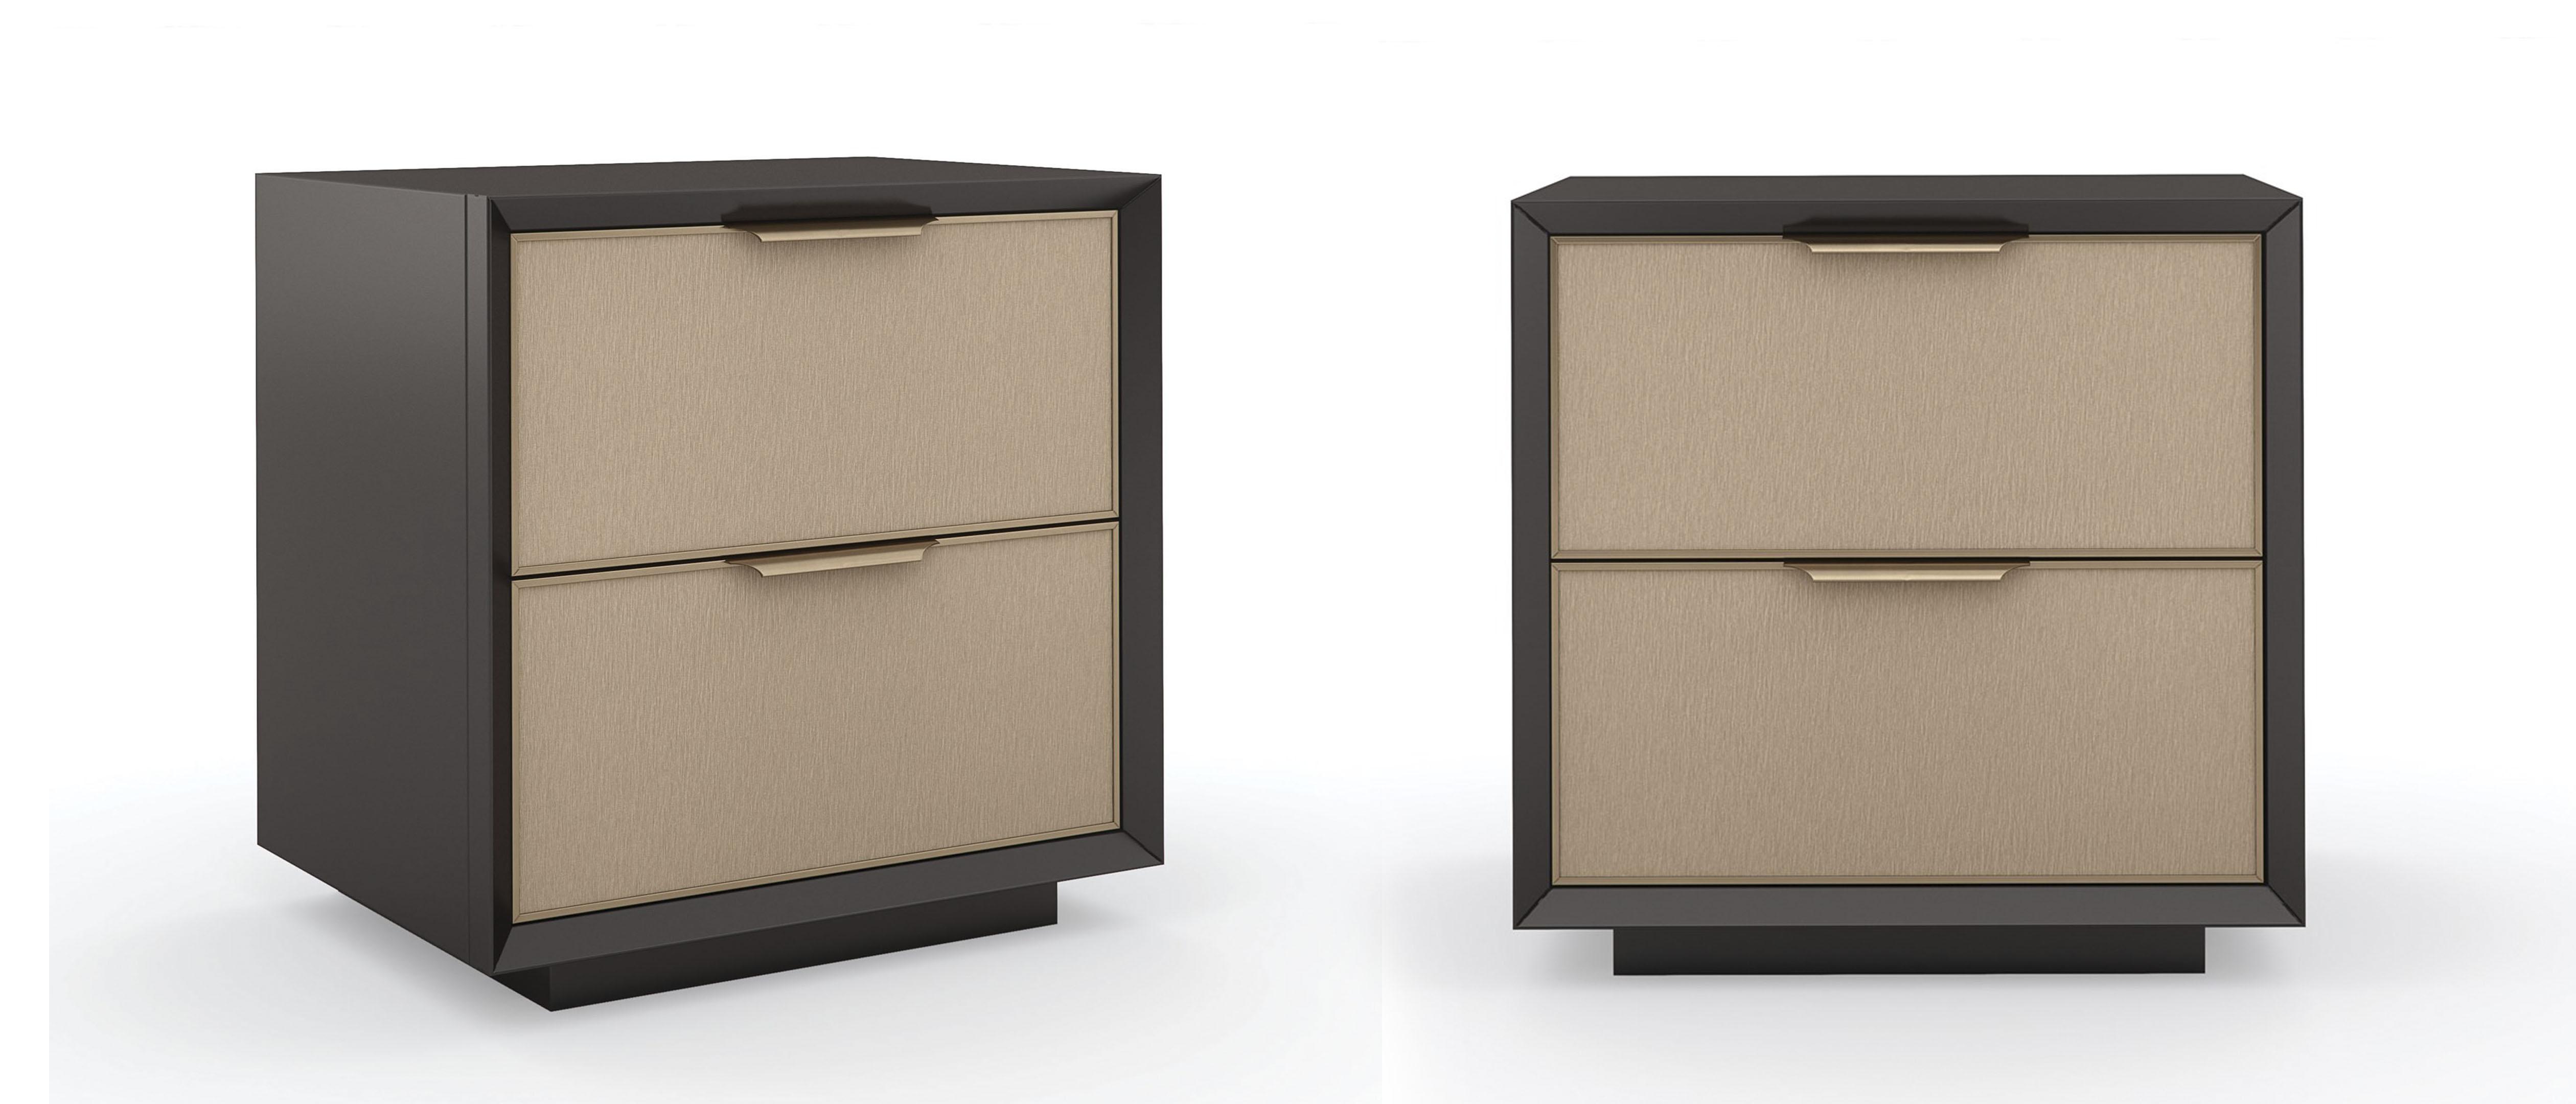 Contemporary Nightstand Set DOUBLE WRAP CLA-020-061-Set-2 in Dark Chocolate, Champagne 